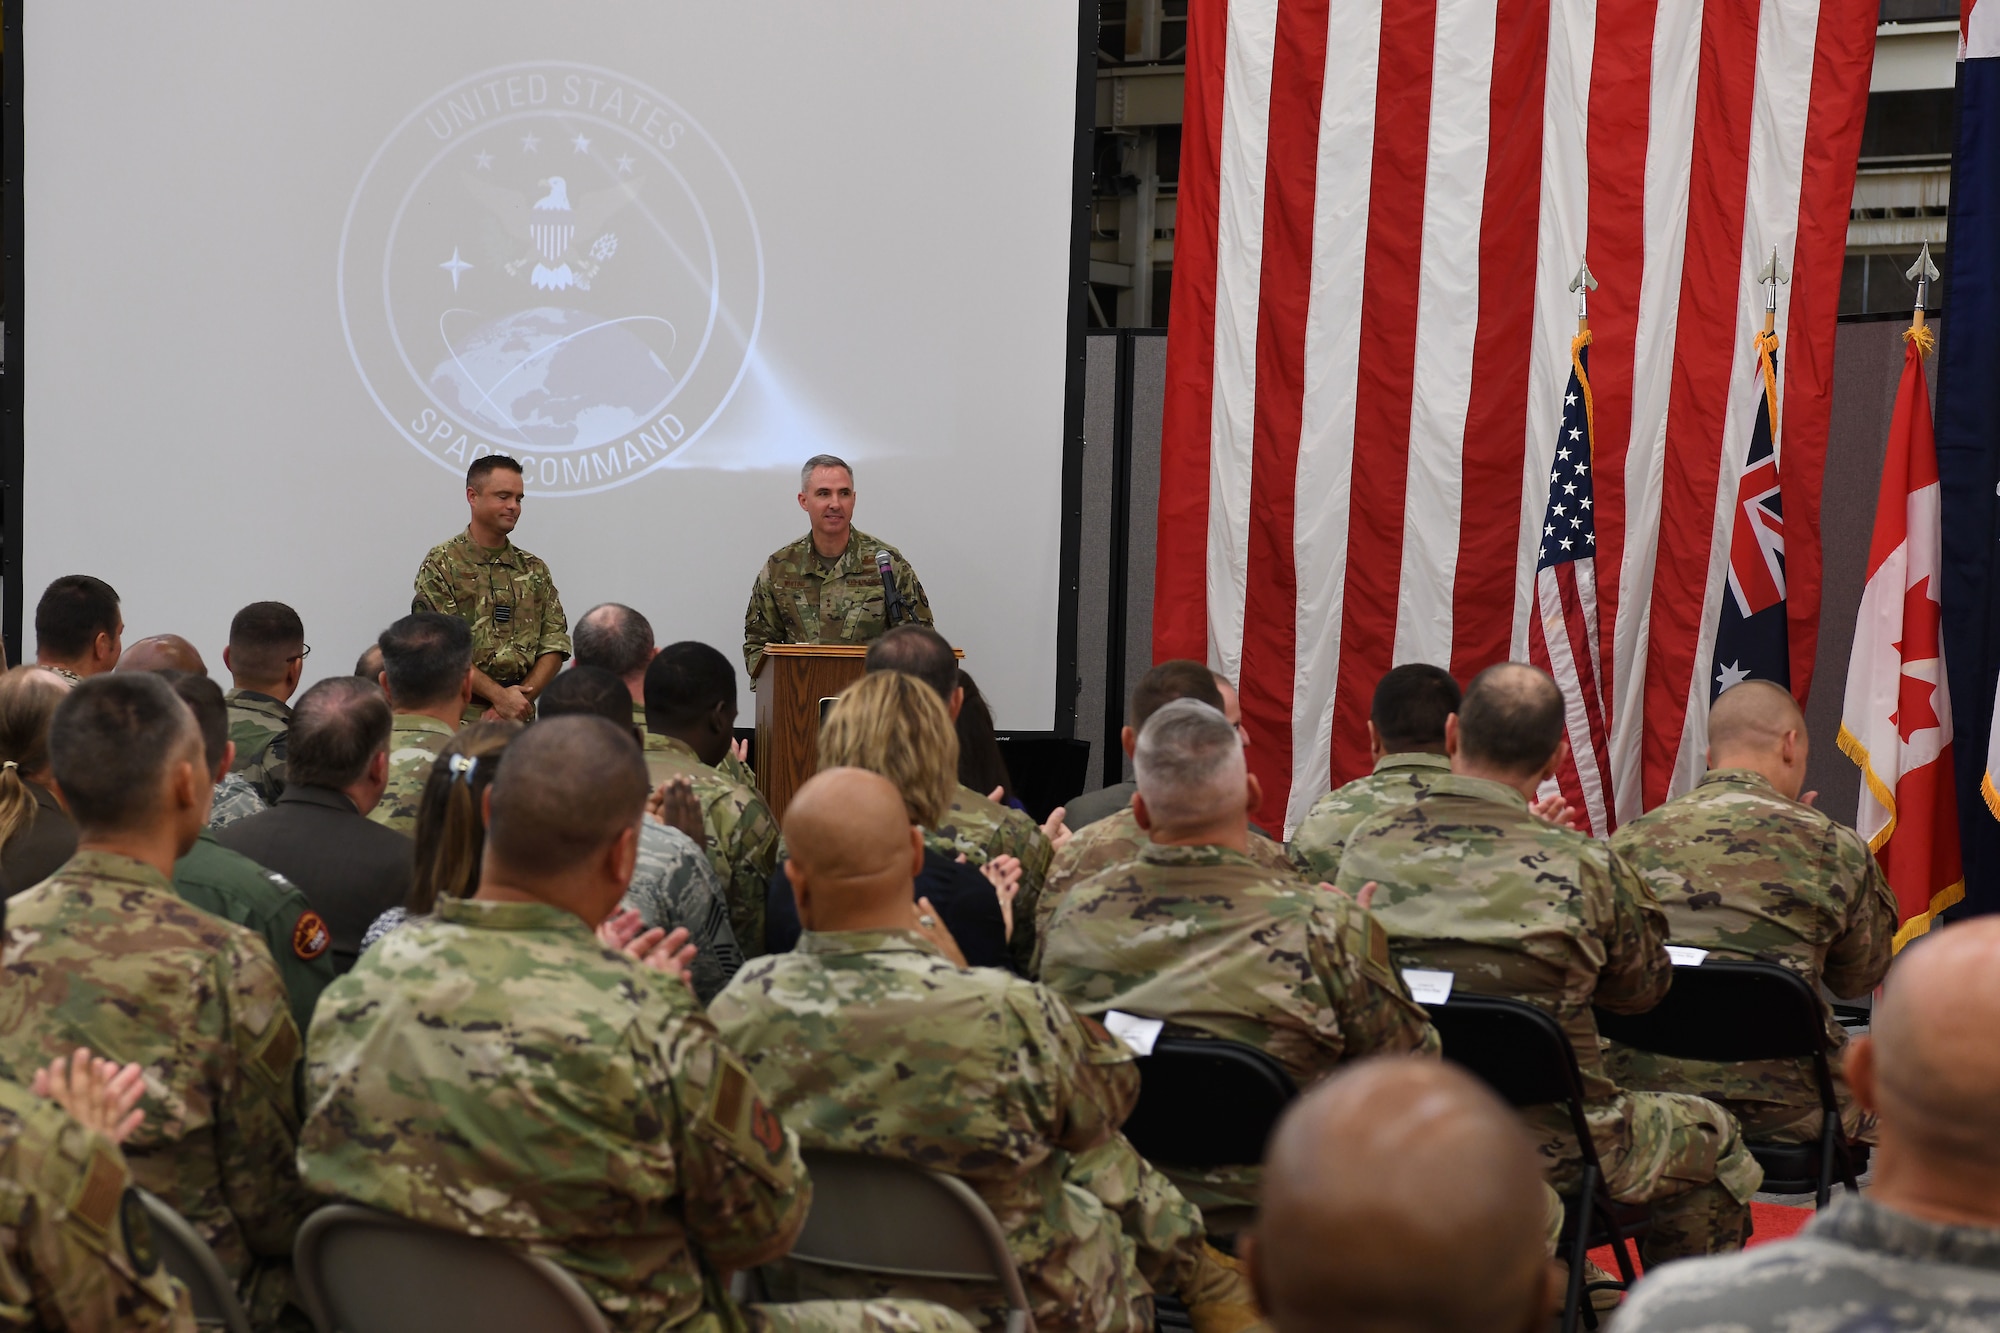 Maj. Gen. Stephen N. Whiting, the Combined Force Space Component Commander and 14th Air Force commander, speaks after assuming command of the CFSCC Oct. 1, 2019, at Vandenberg Air Force Base, Calif.